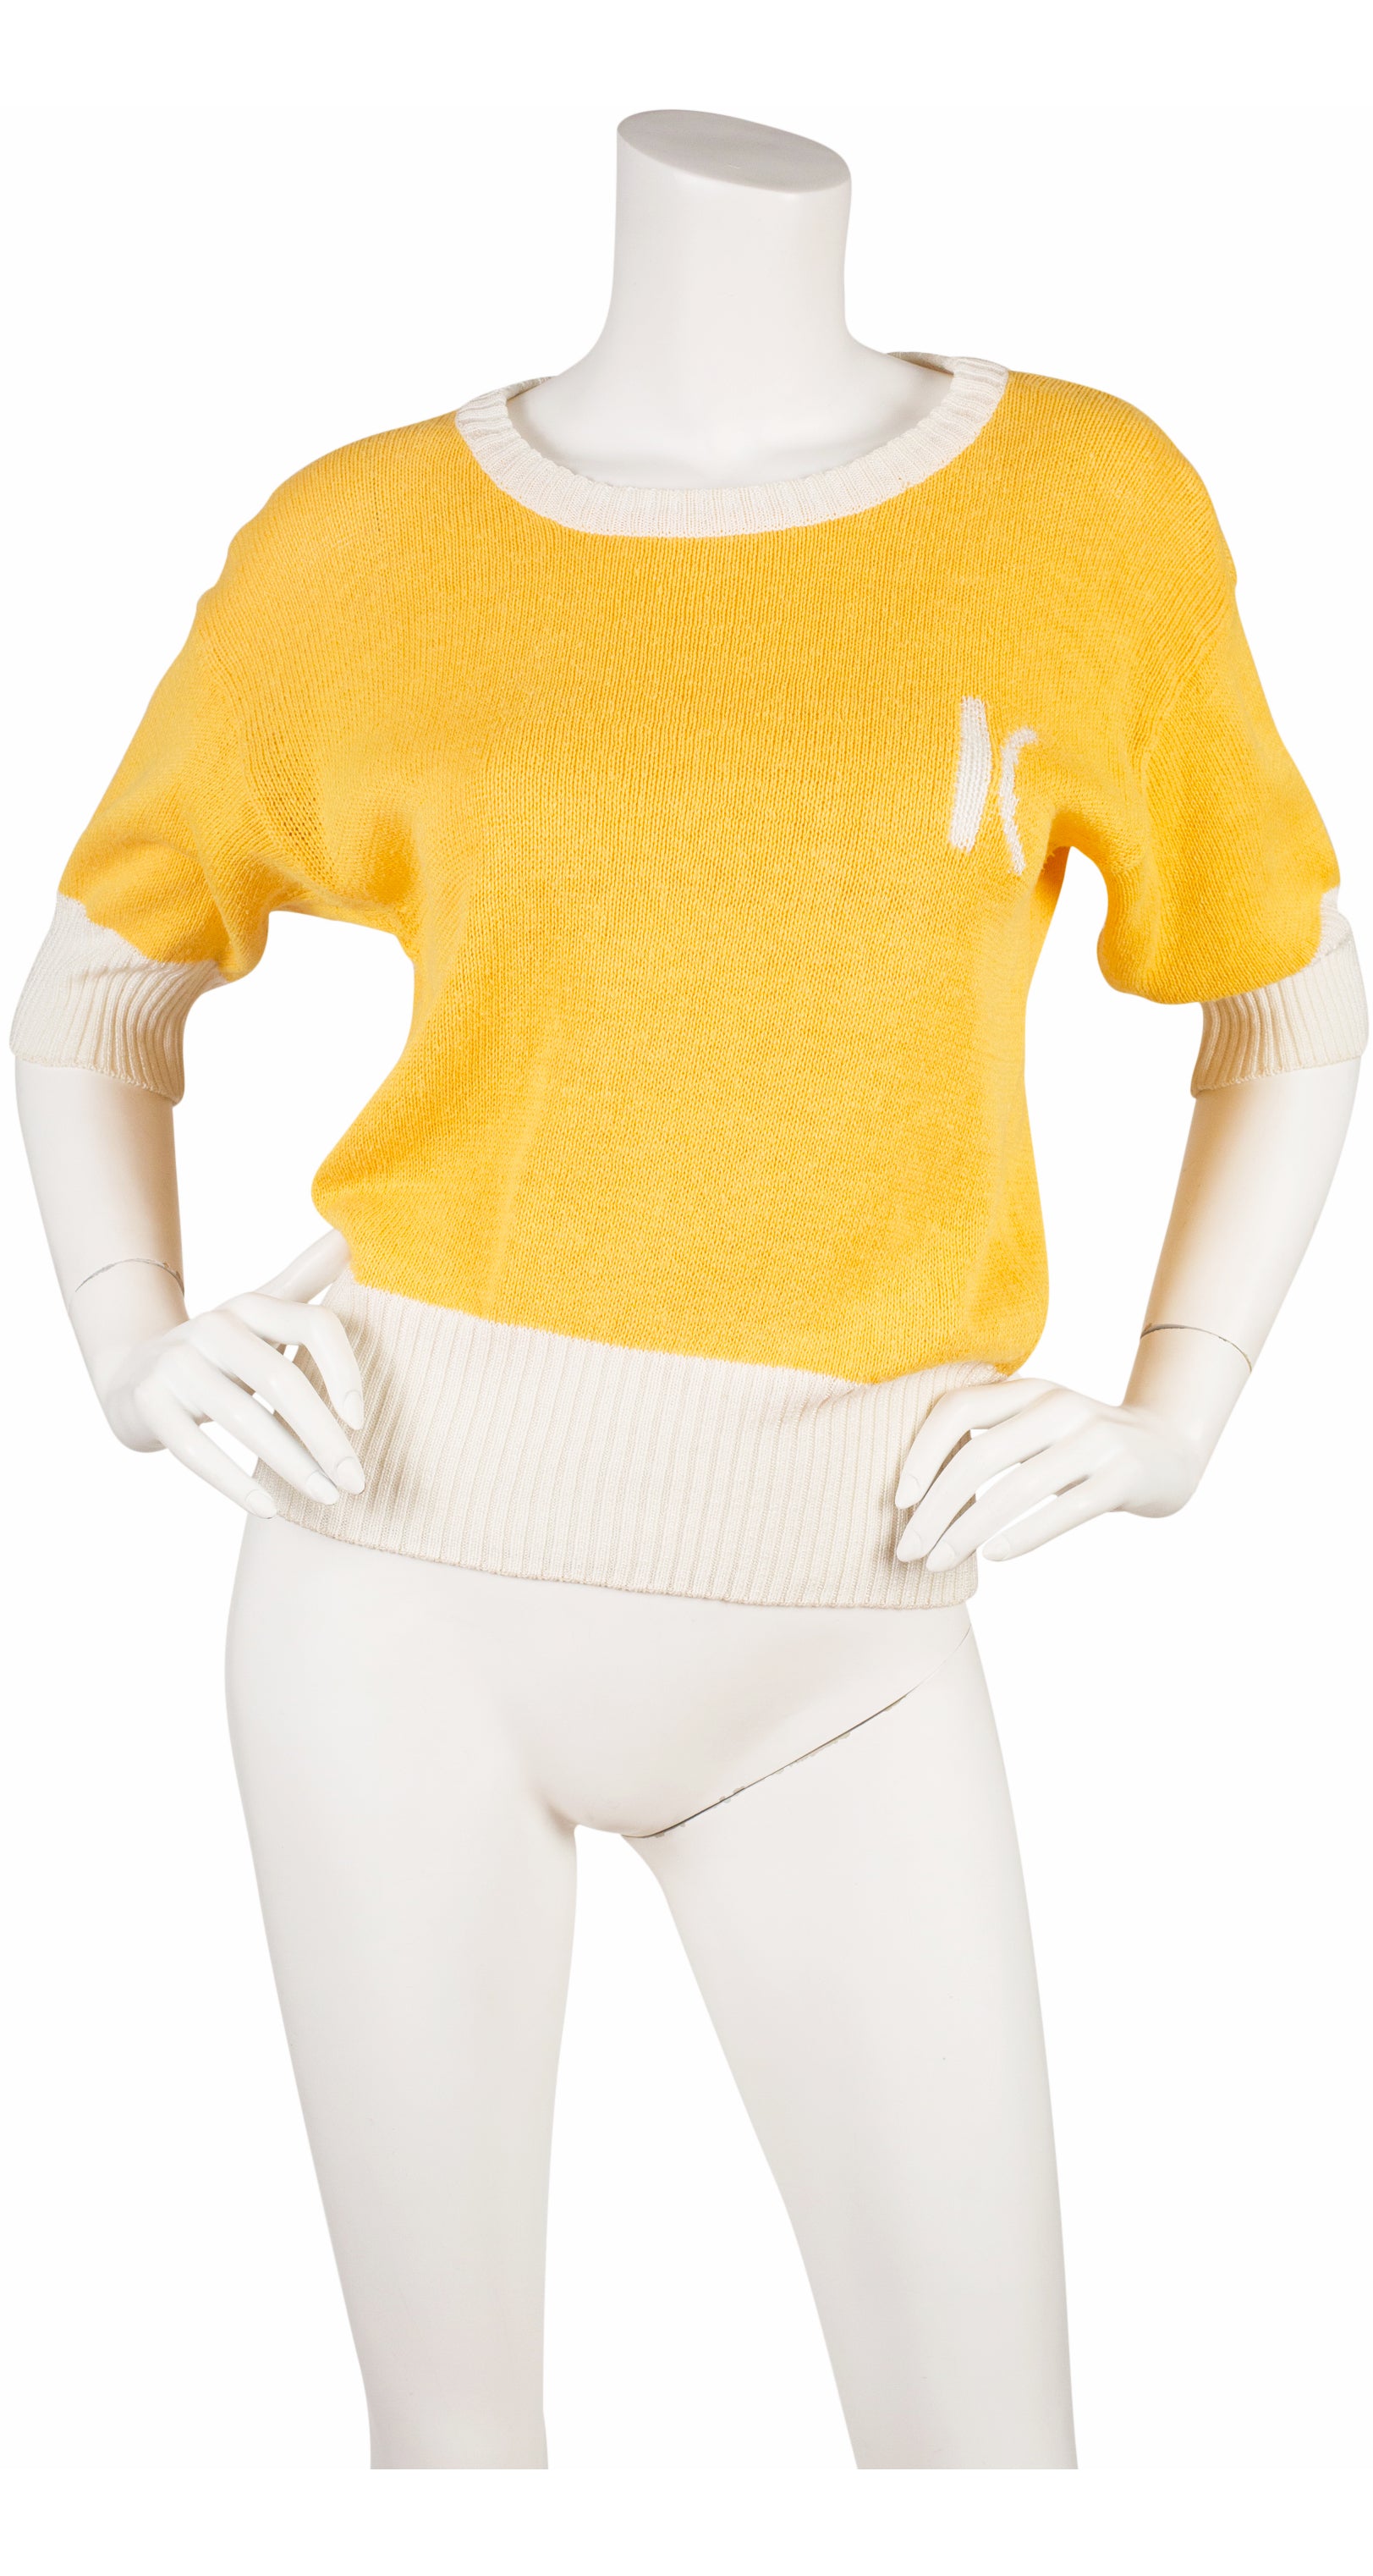 1980s "K" Yellow & White Short Sleeve Knit Top